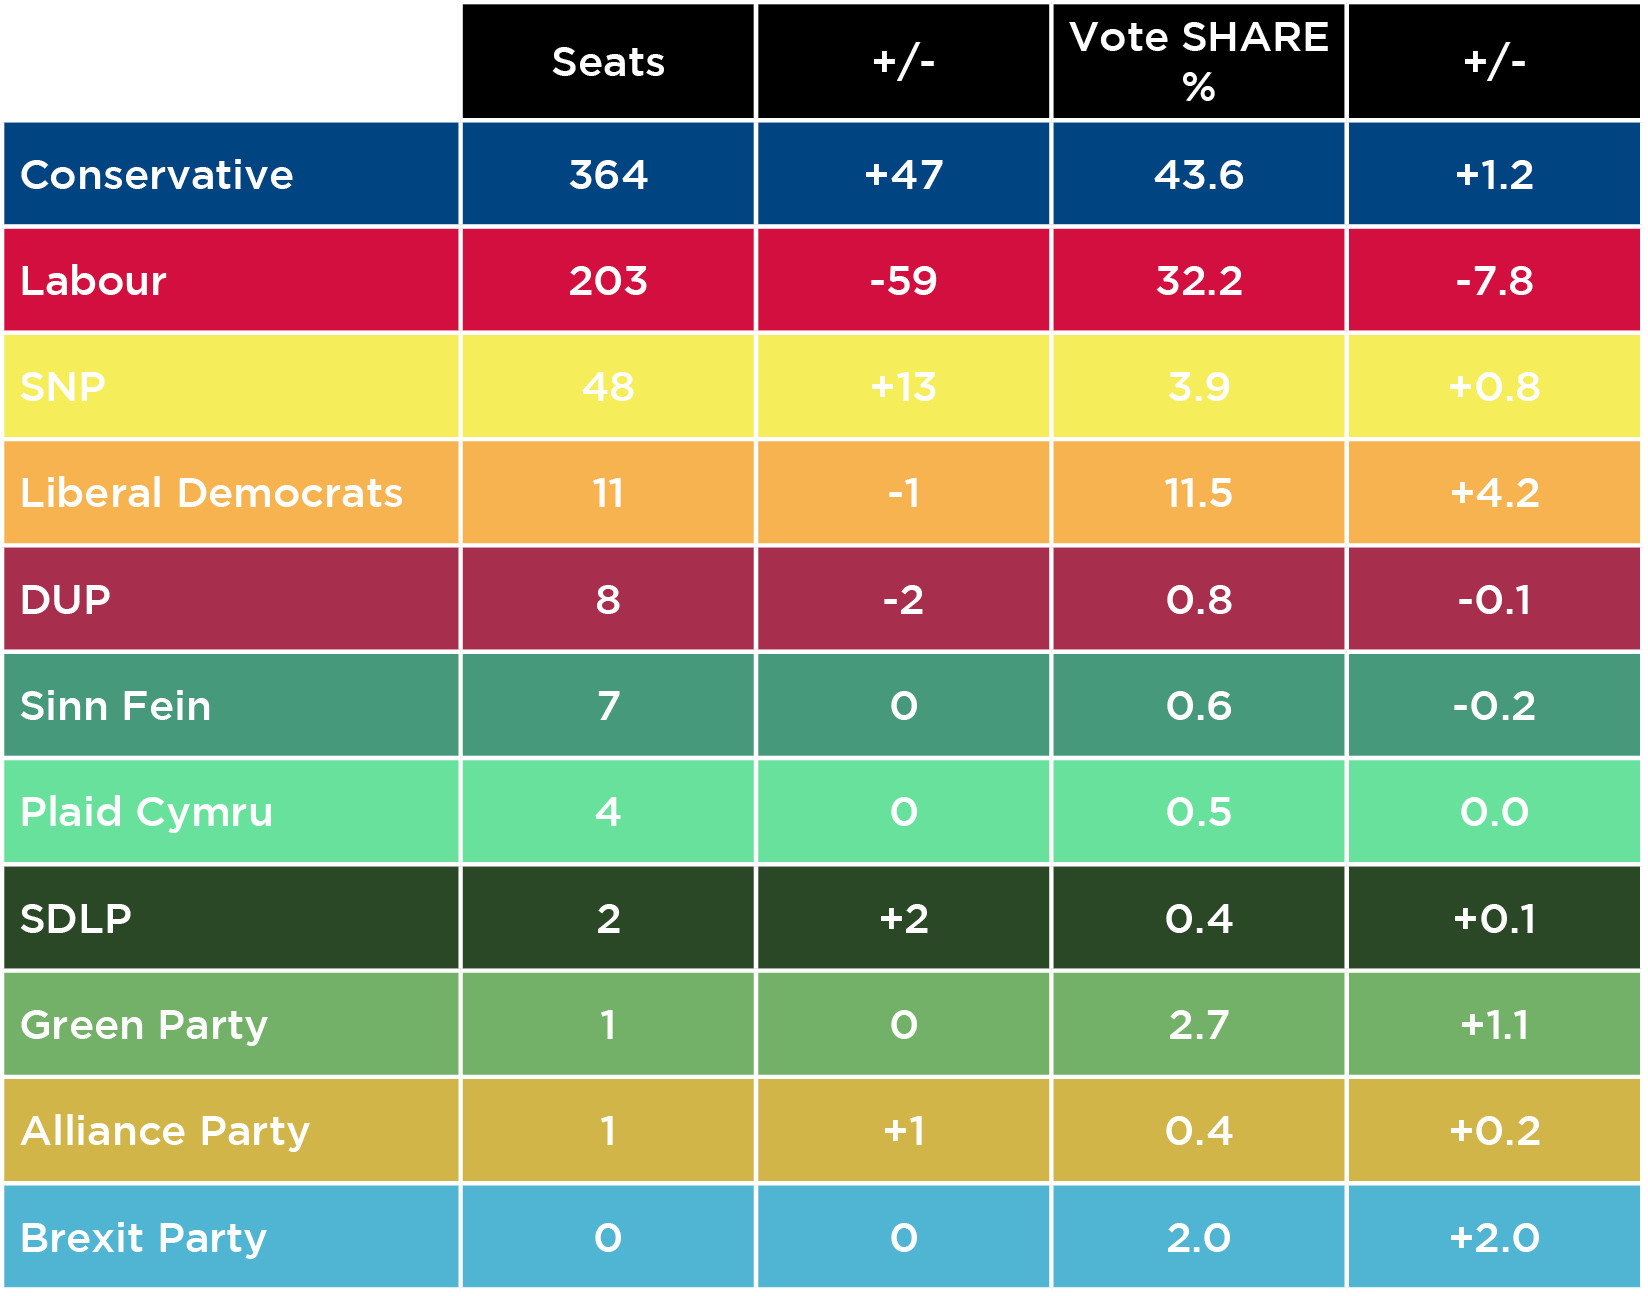 local-elections-2019-results-table-5df3a1f65782a.jpg (original)